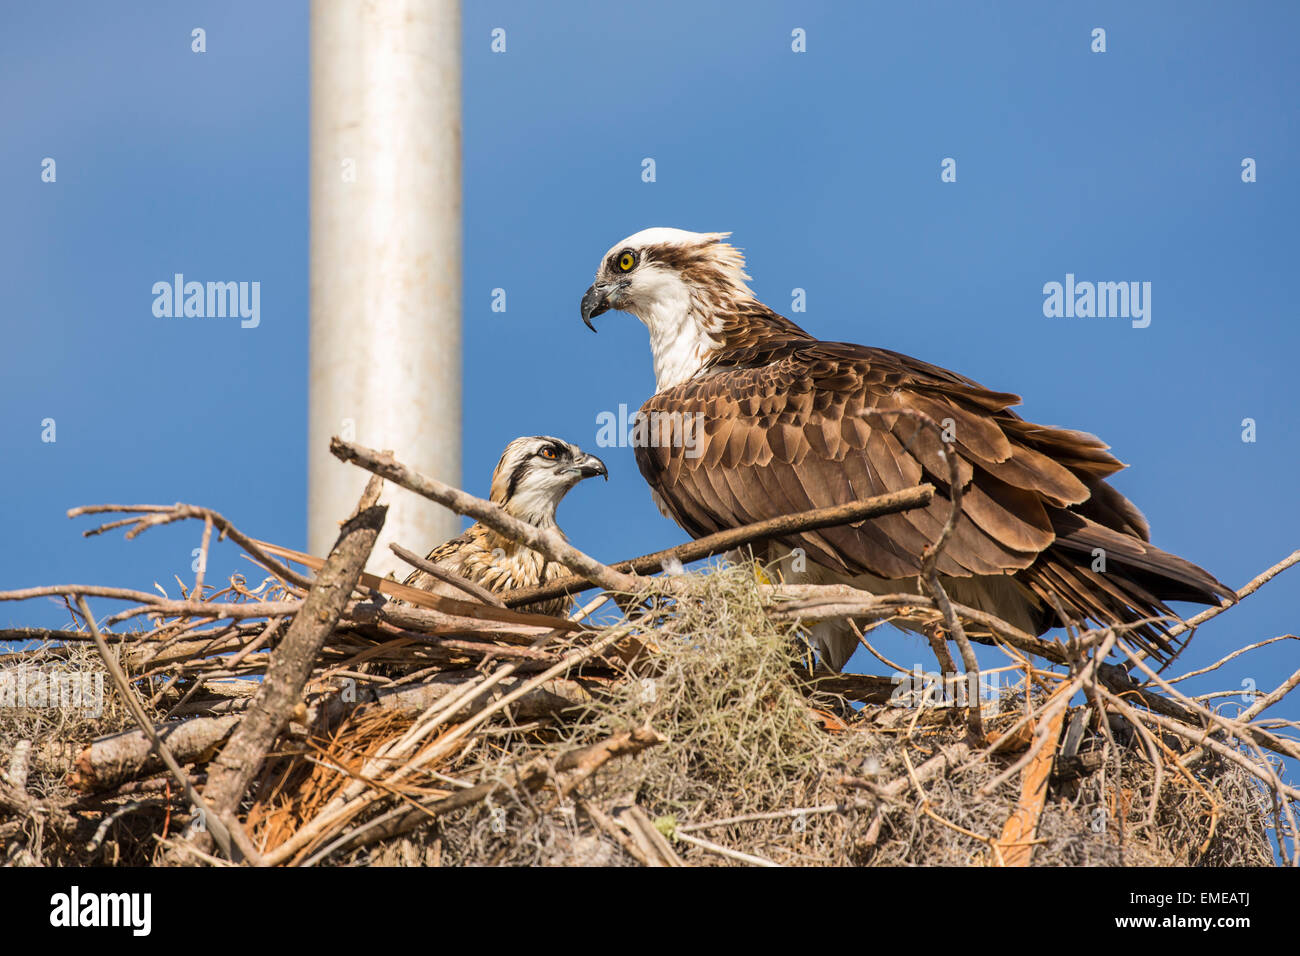 Osprey (Pandion haliaetus) nesting with it's nestling at the Flamingo visitor center in the Florida Everglades National Park. Stock Photo